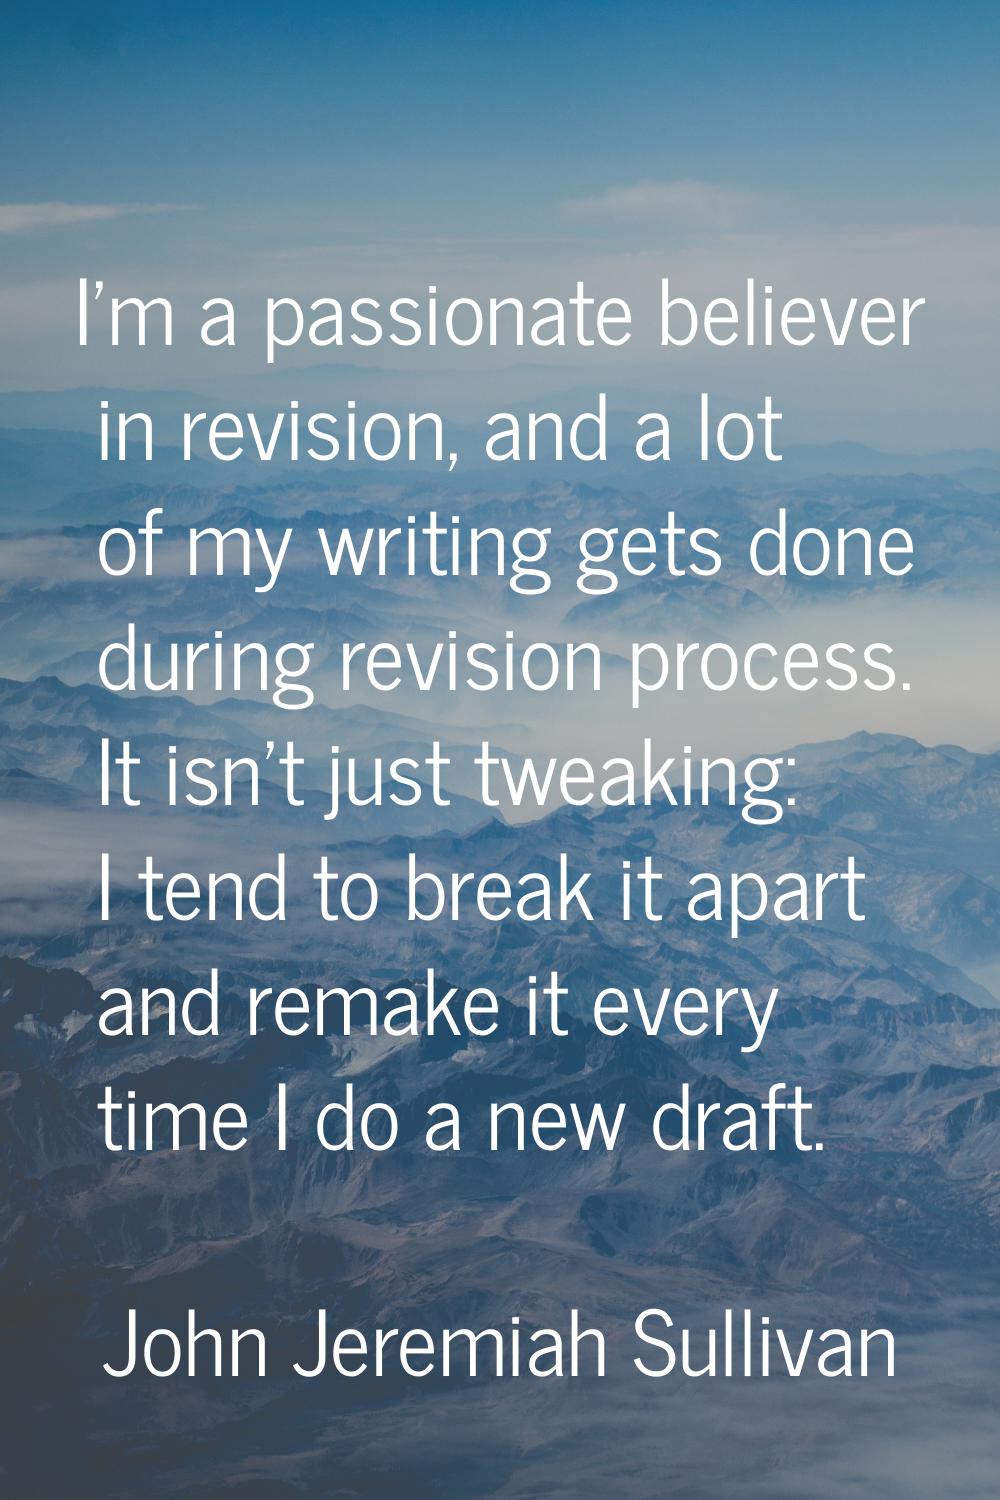 I'm a passionate believer in revision, and a lot of my writing gets done during revision process. I